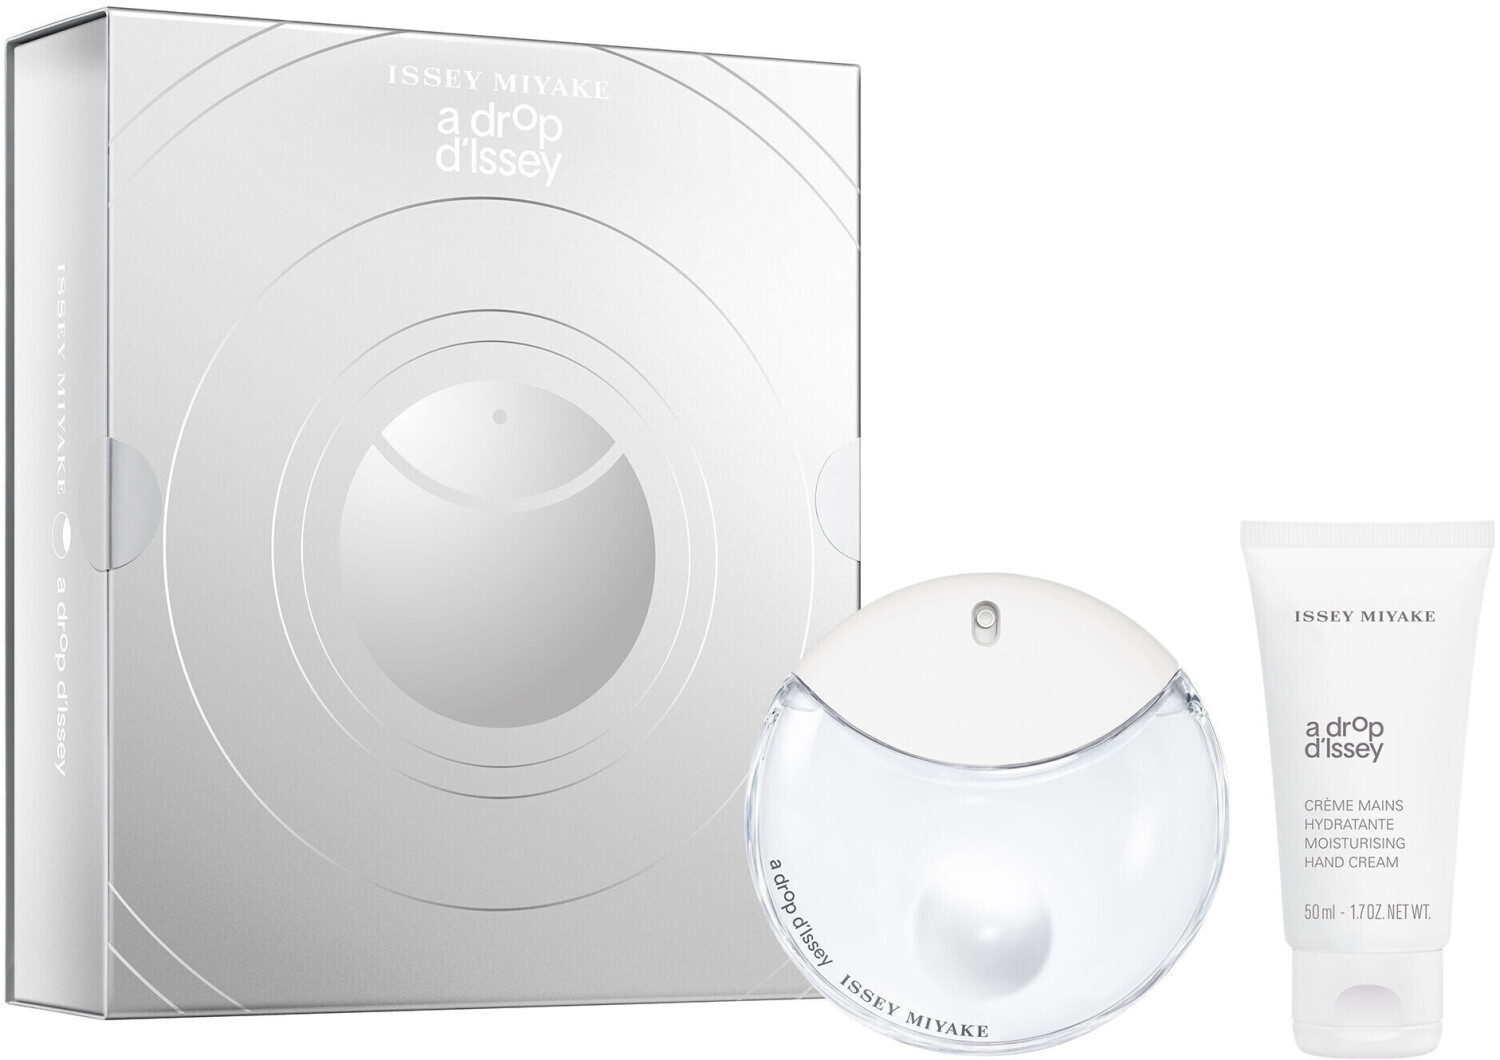 Buy Issey Miyake A Drop d'Issey Giftset (EdP 50ml + HC 50ml) from £45.51  (Today) – Best Deals on idealo.co.uk